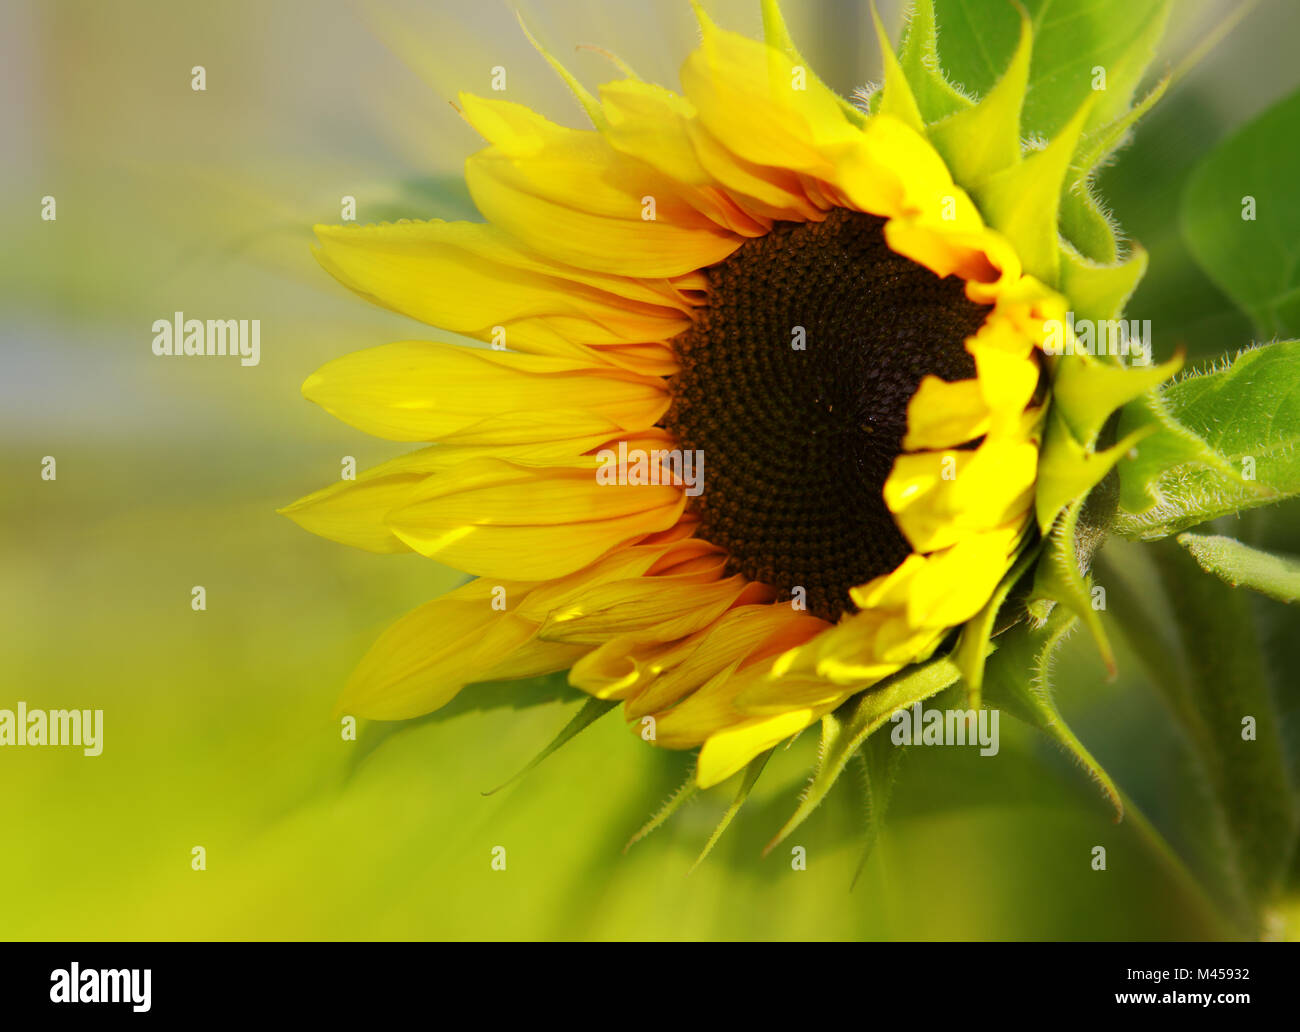 Sunflower bouquet isolated on green background.Mother's day card. Stock Photo